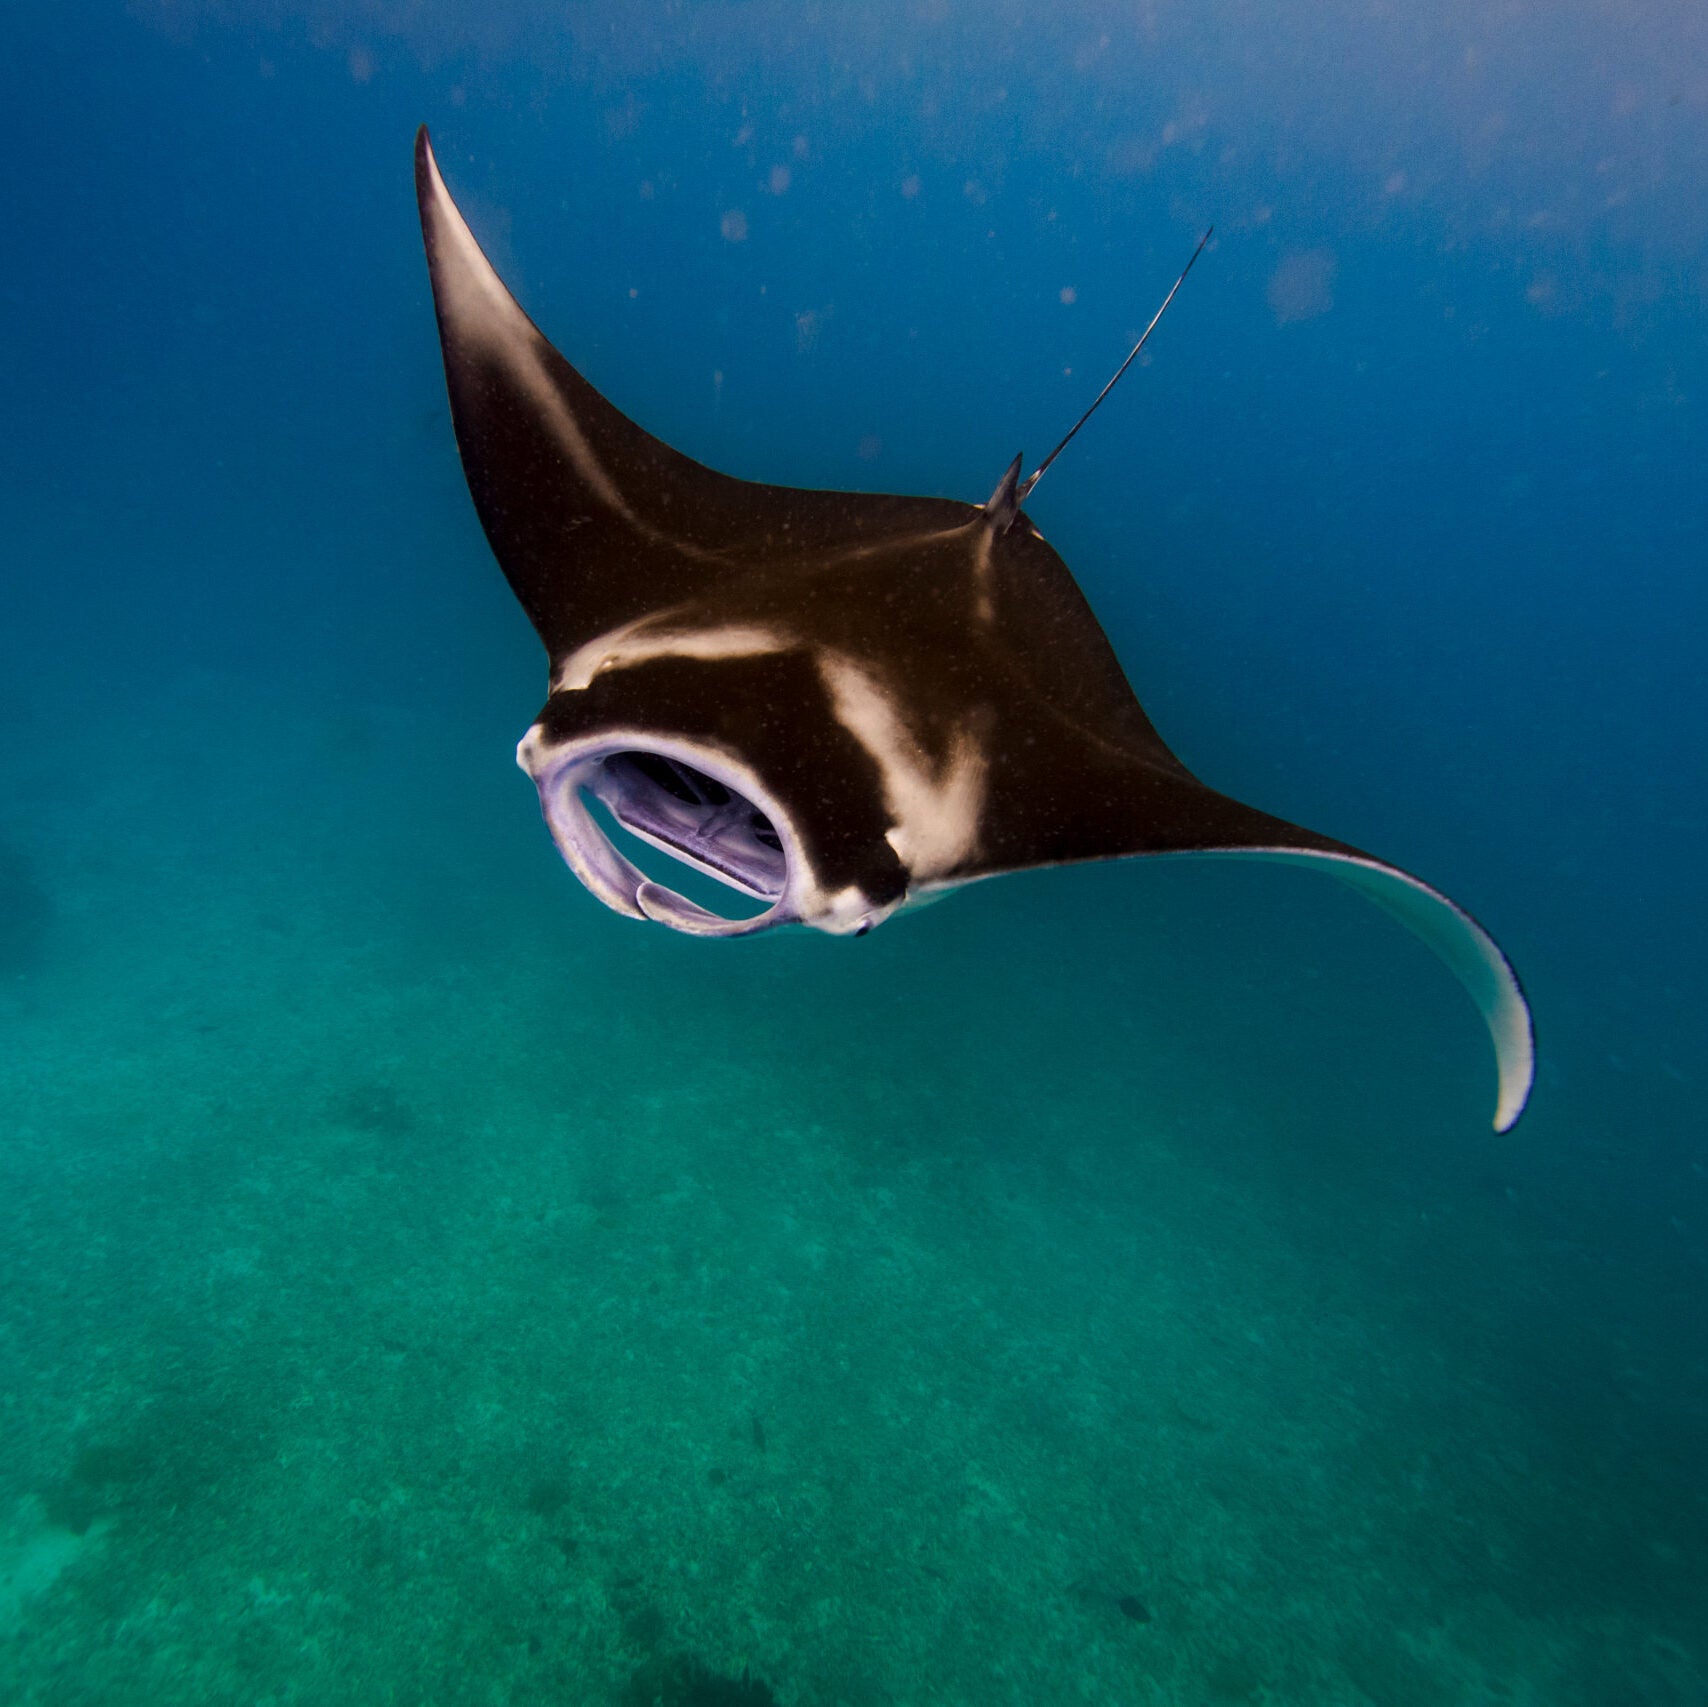 Underwater photo of a Reef Manta taken by Assistant Professor Jason Jaacks a part of a multi-year visual study of the biodiversity of the Coral Triangle region of the south Pacific.